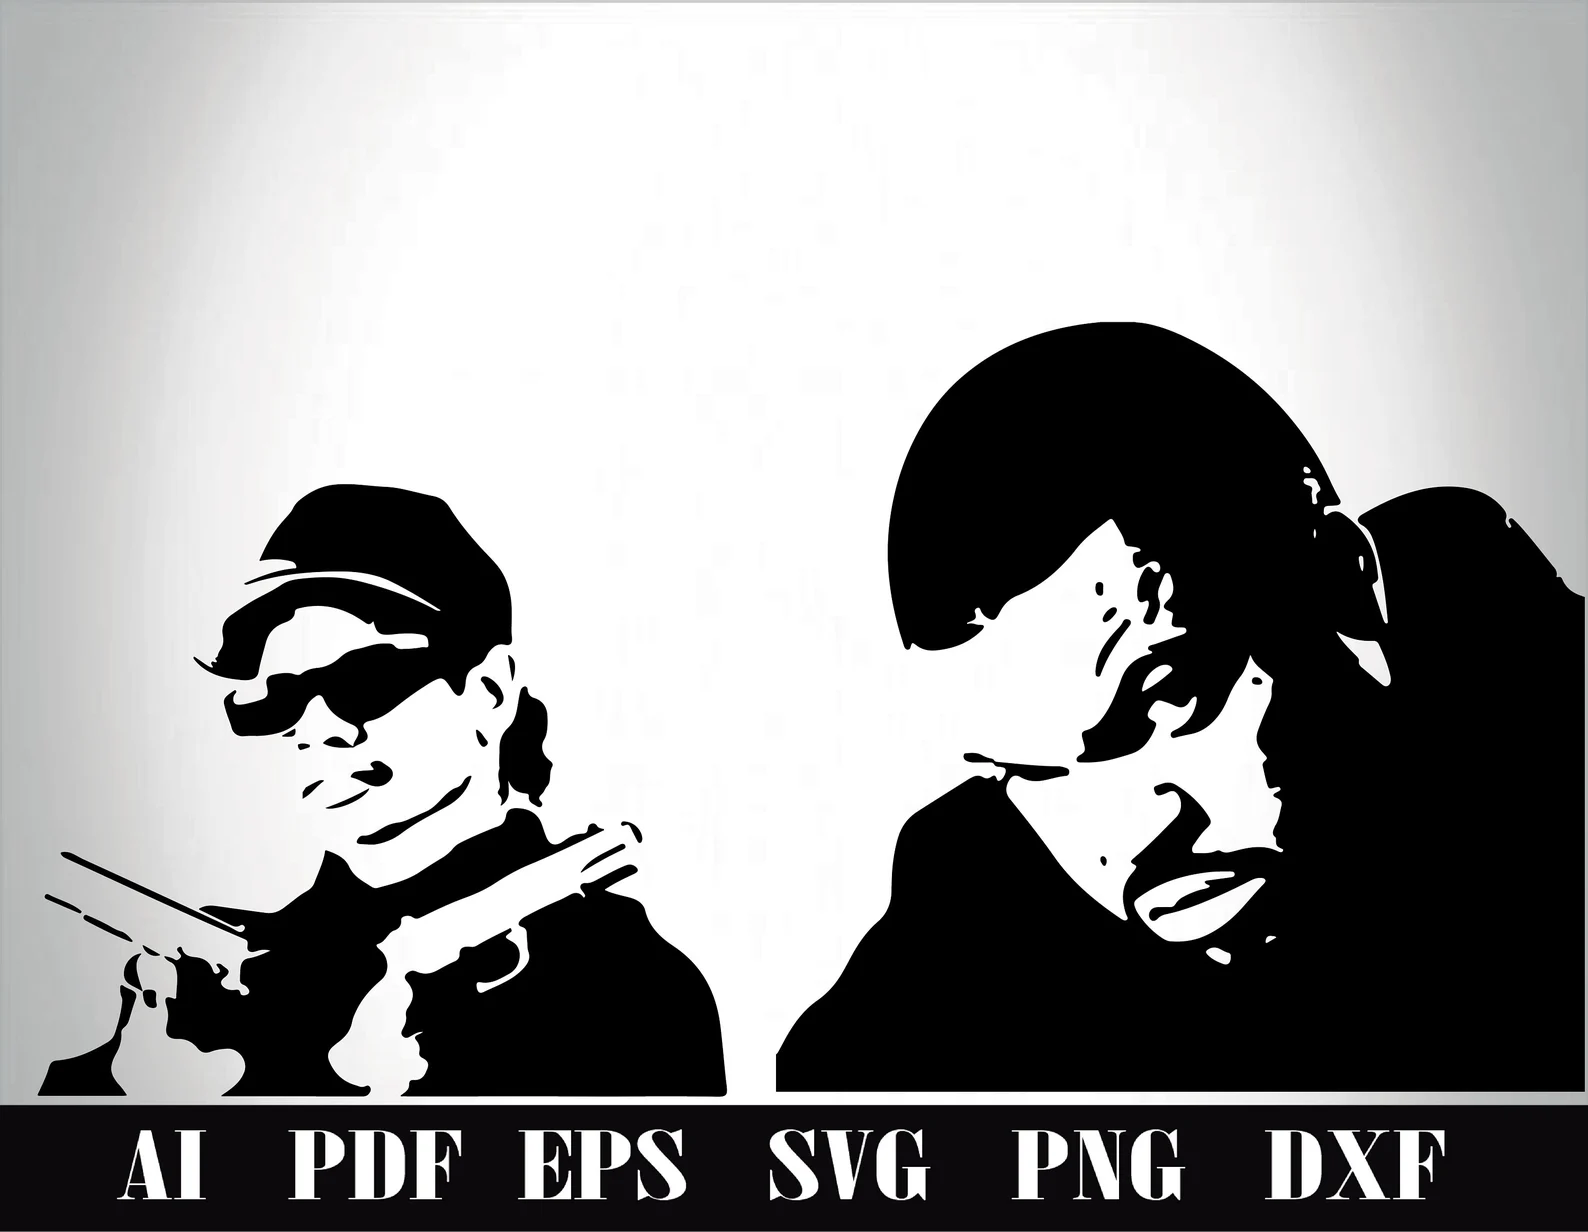 Two famous rap artist in a silhouette style.